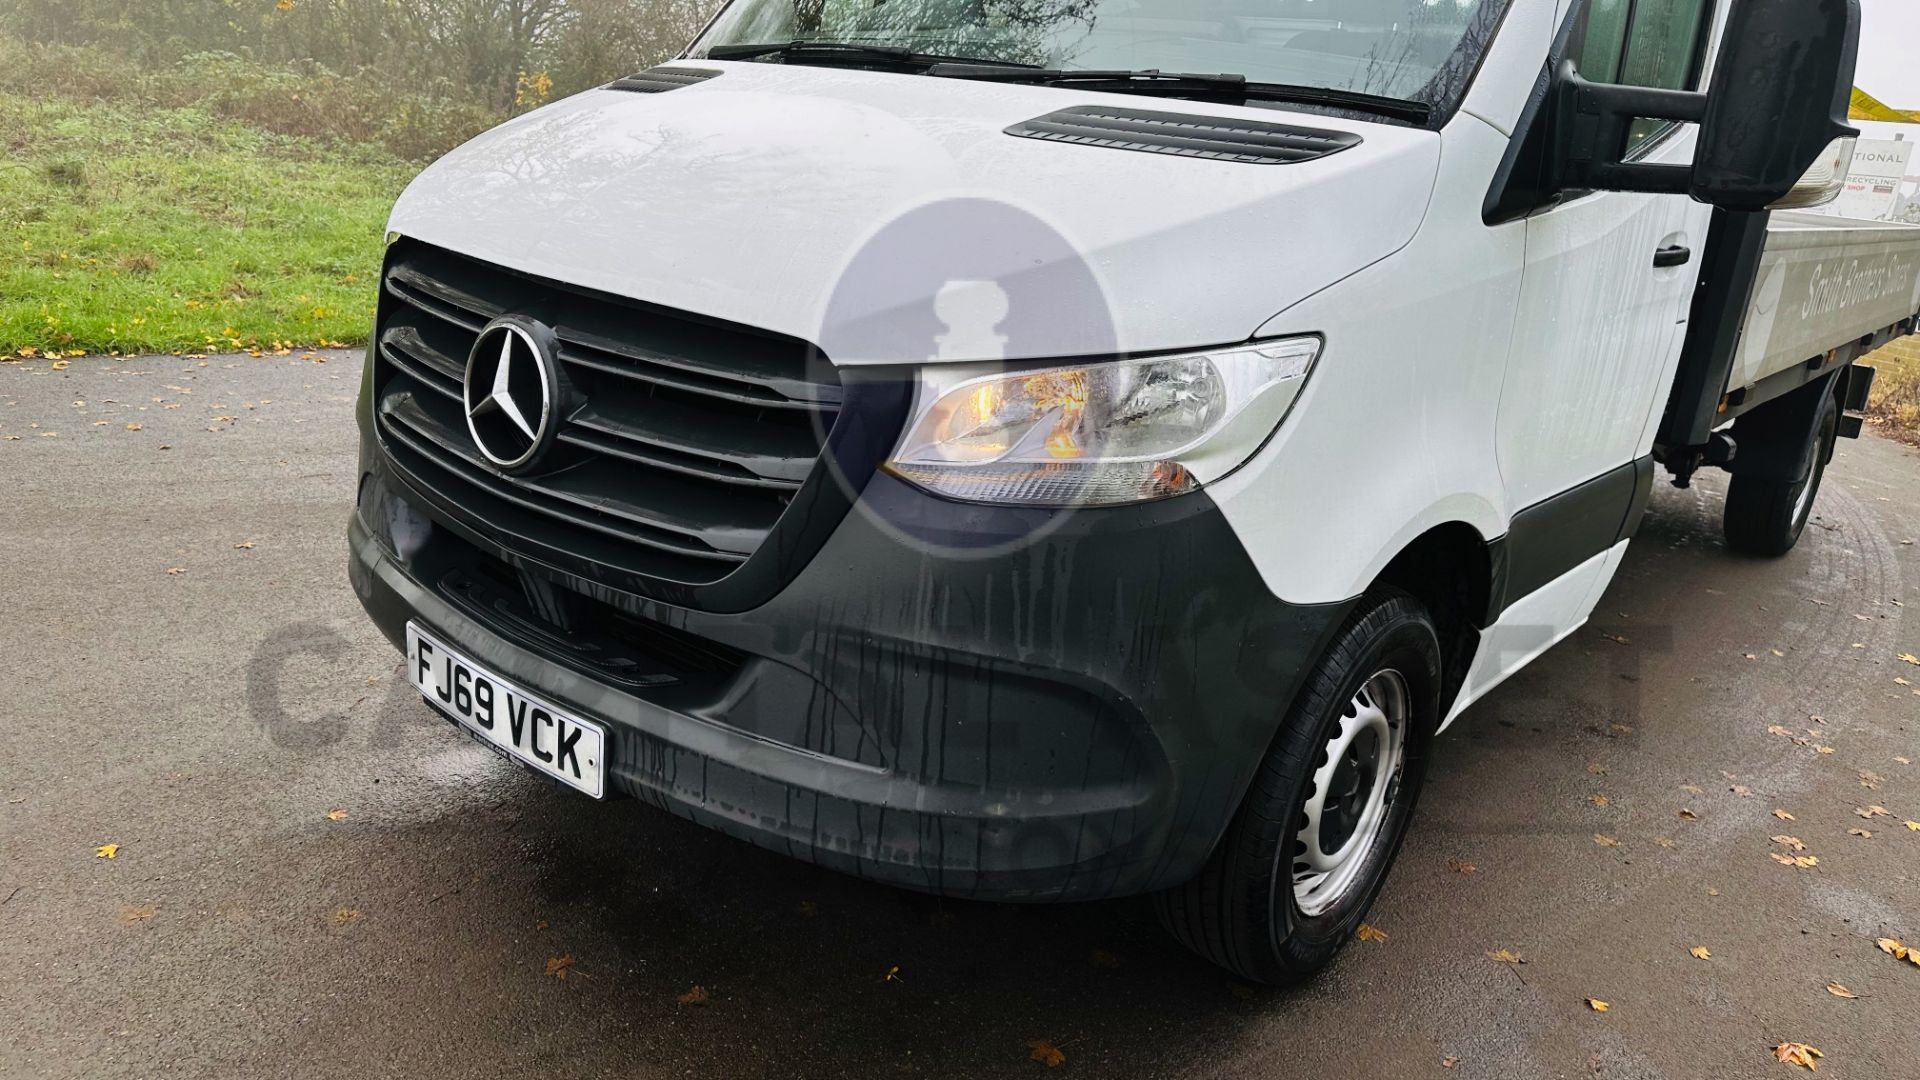 (ON SALE) MERCEDES-BENZ SPRINTER 314 CDI *LWB - DROPSIDE TRUCK* (2020 - EURO 6) 141 BHP - AUTOMATIC - Image 16 of 37